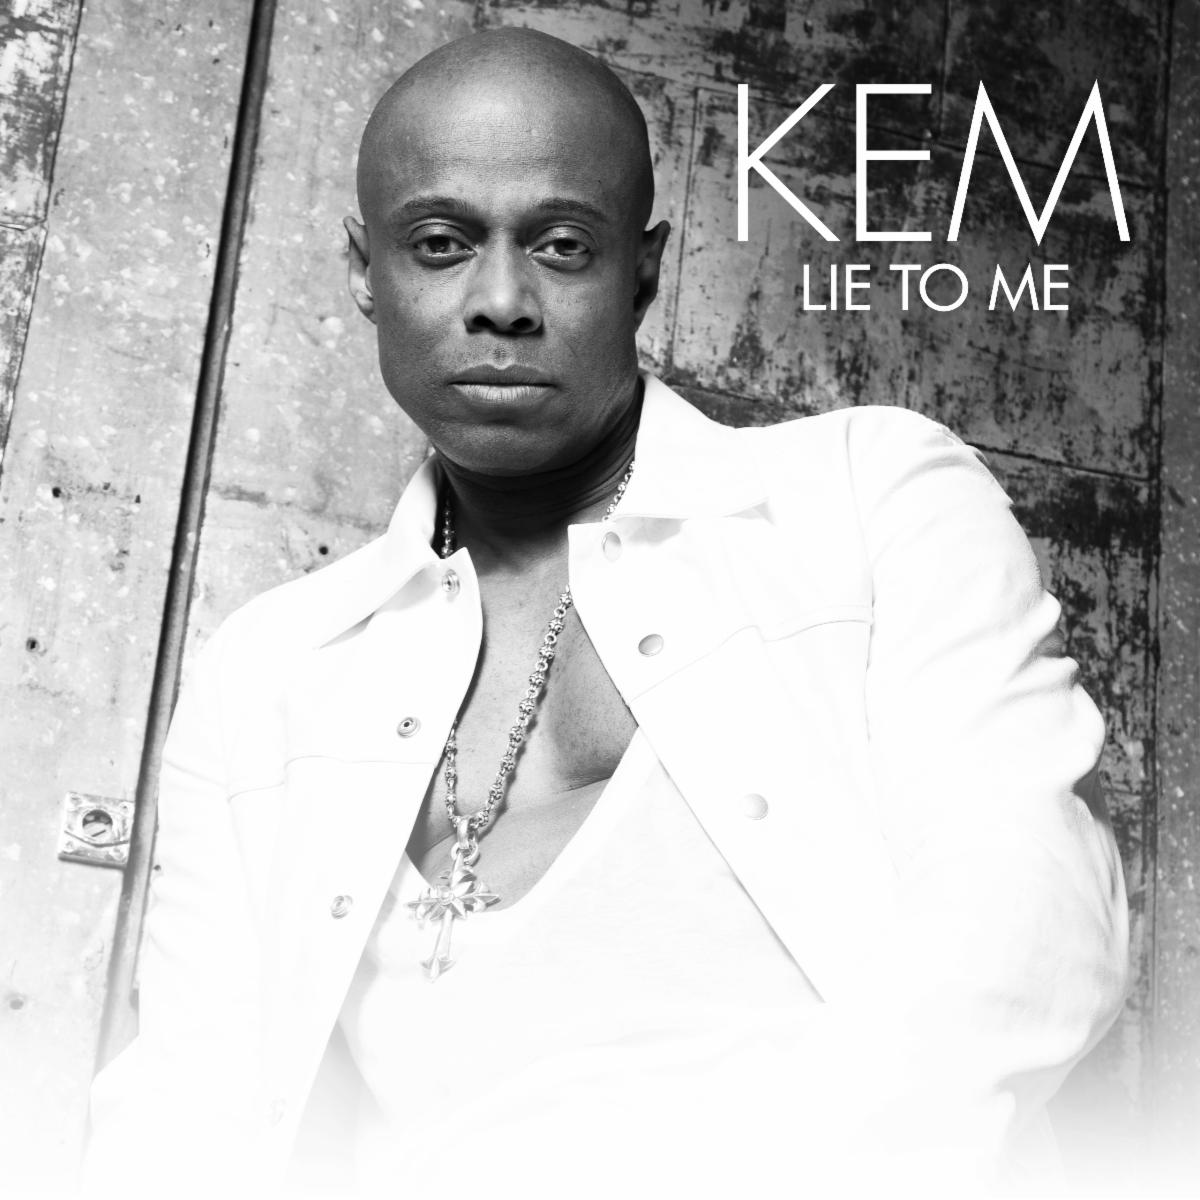 Kem Returns With New Single "Lie to Me" Co-Written by Anthony Hamilton, Salaam Remi, James Poyser